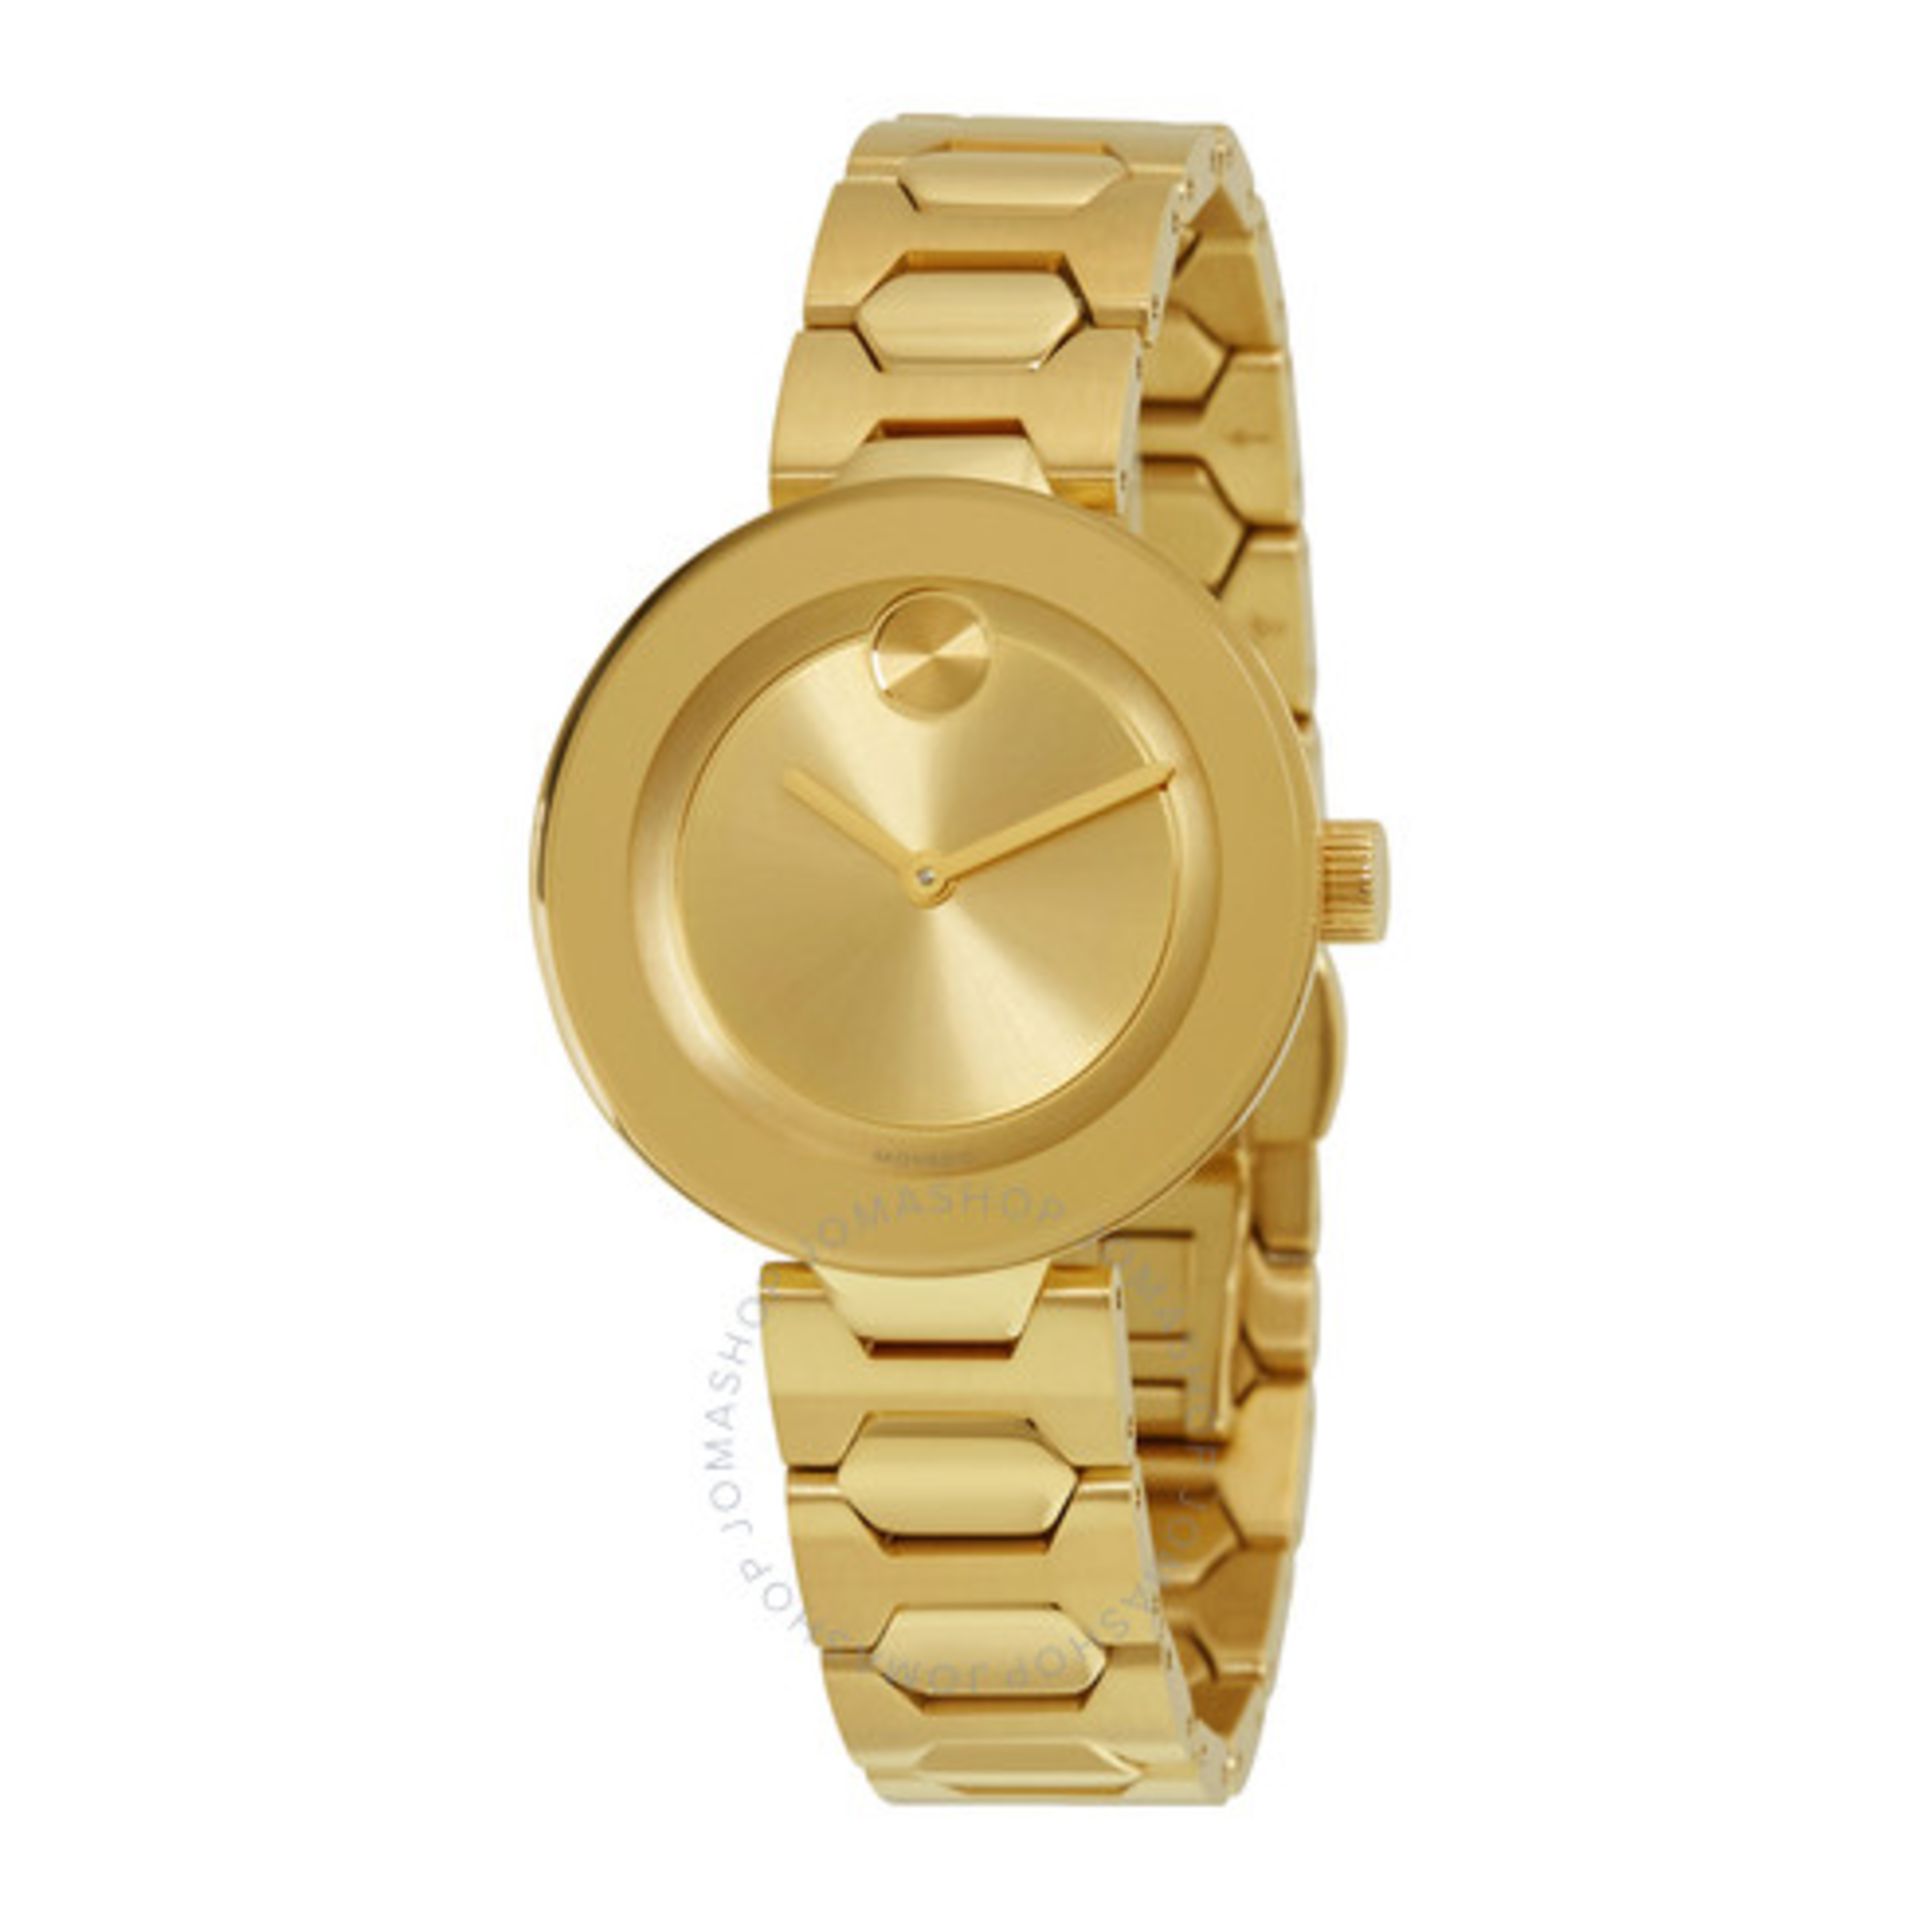 Movado Bold ladies watch reference 3600382, PVD yellow gold plate bracelet & case, champagne dial.